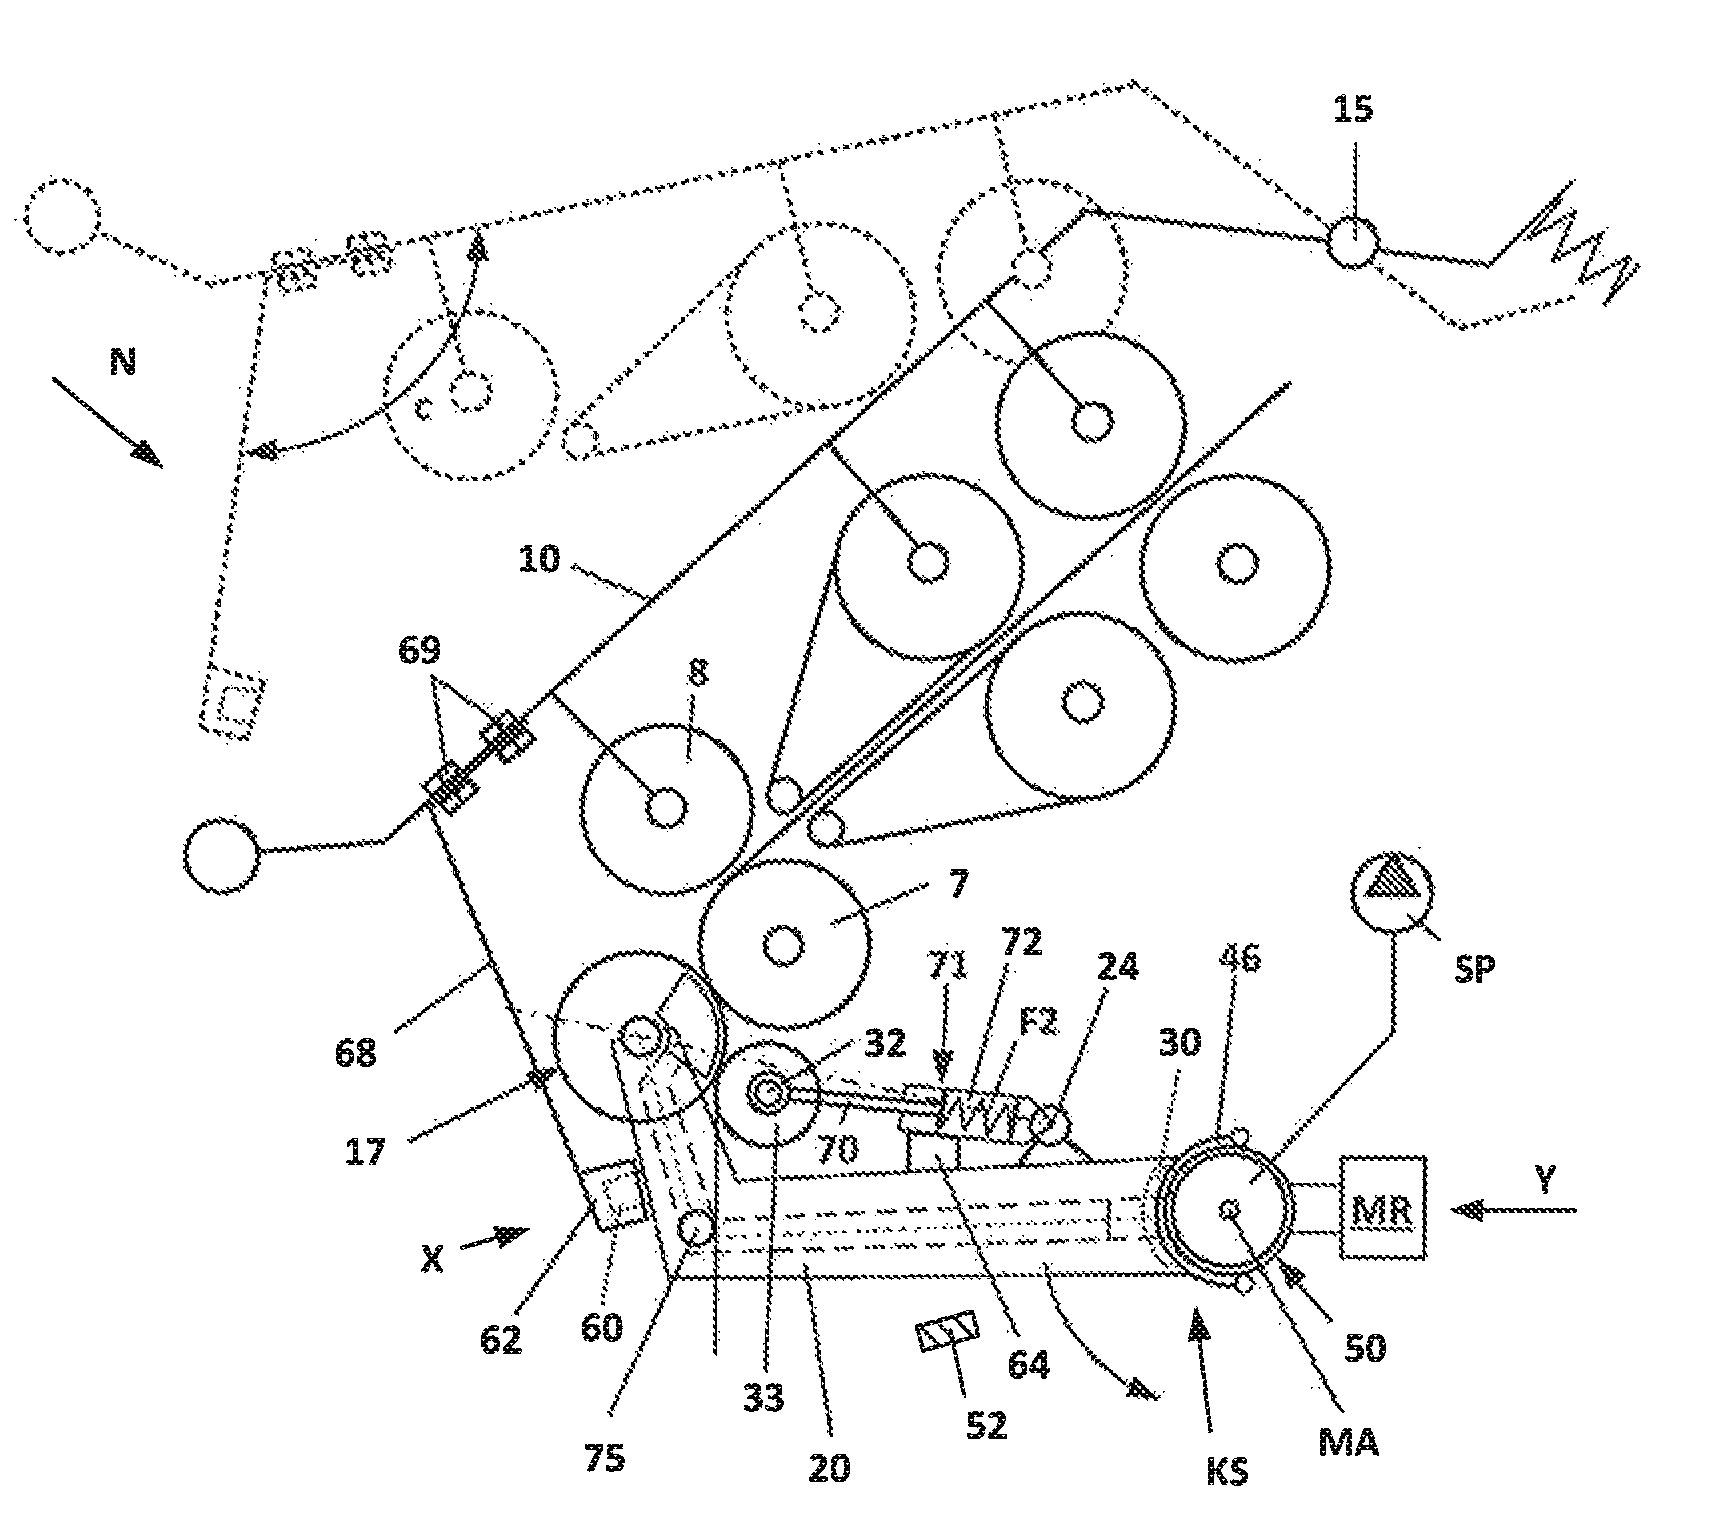 Spinning machine having a compaction device